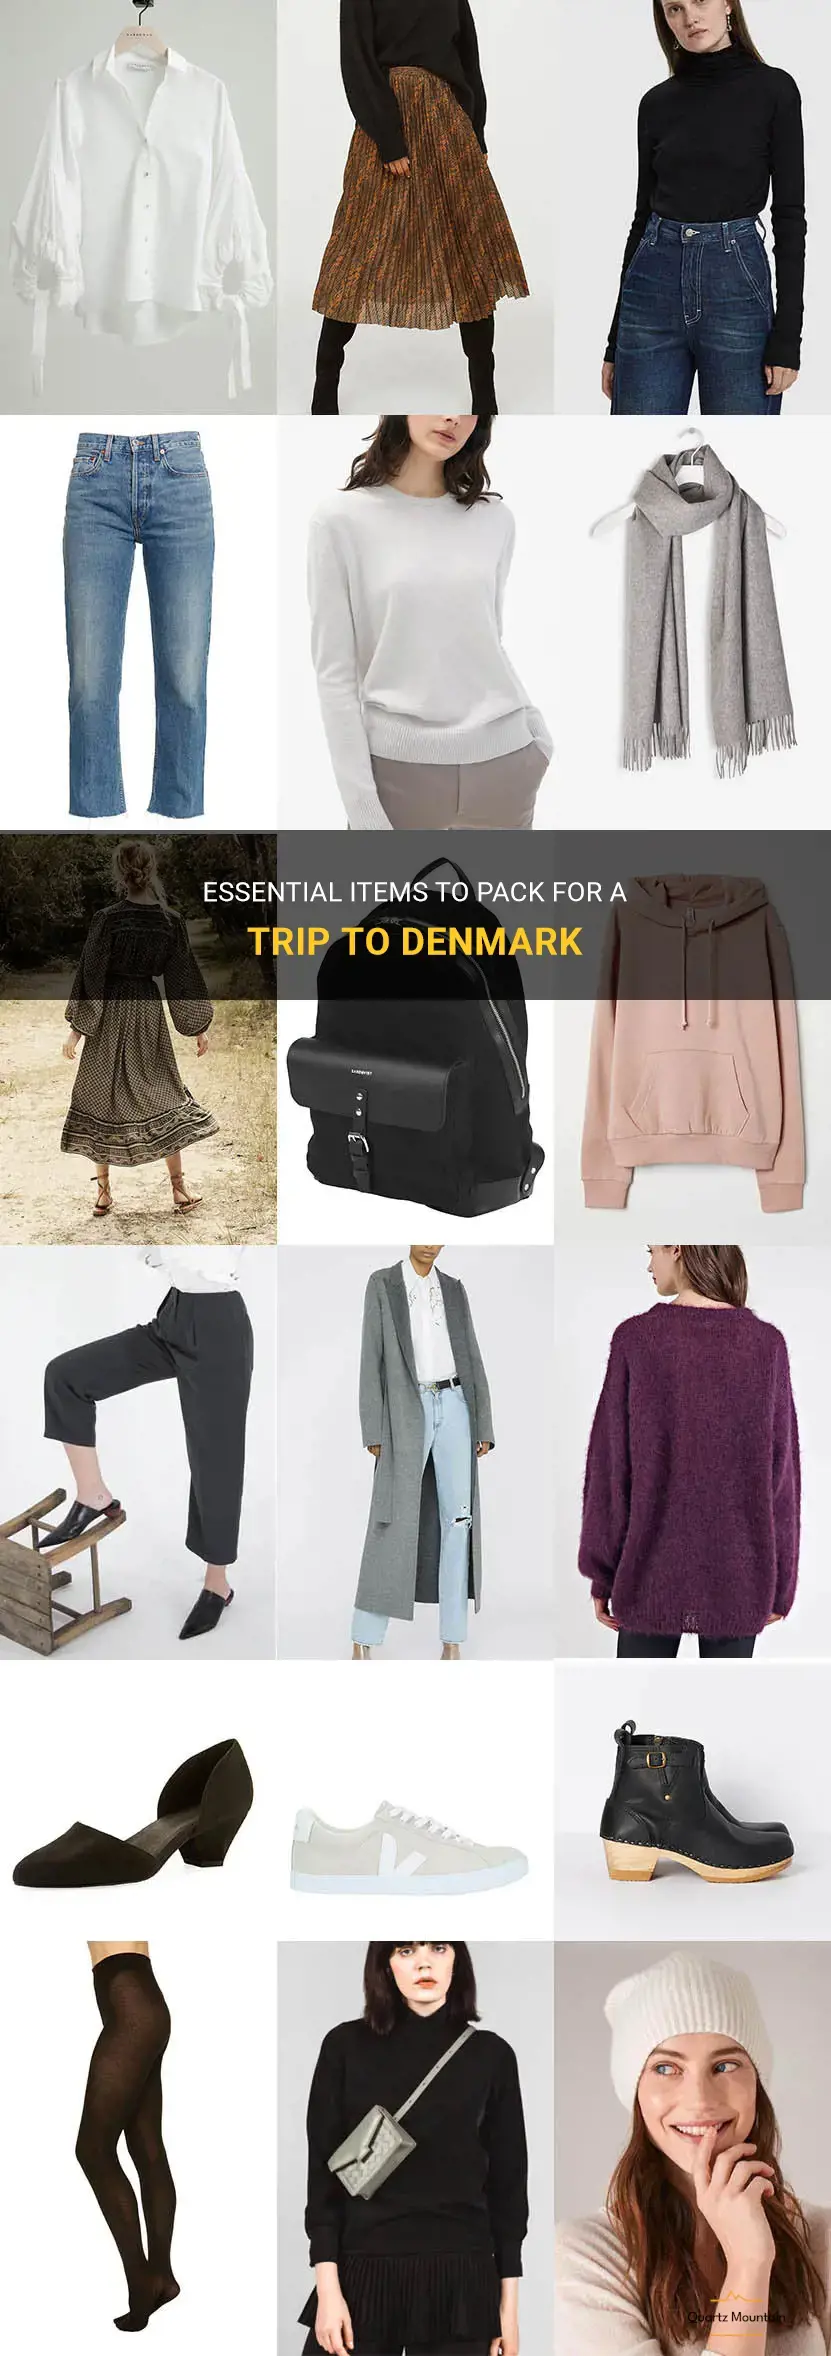 what should you pack to go to denmark